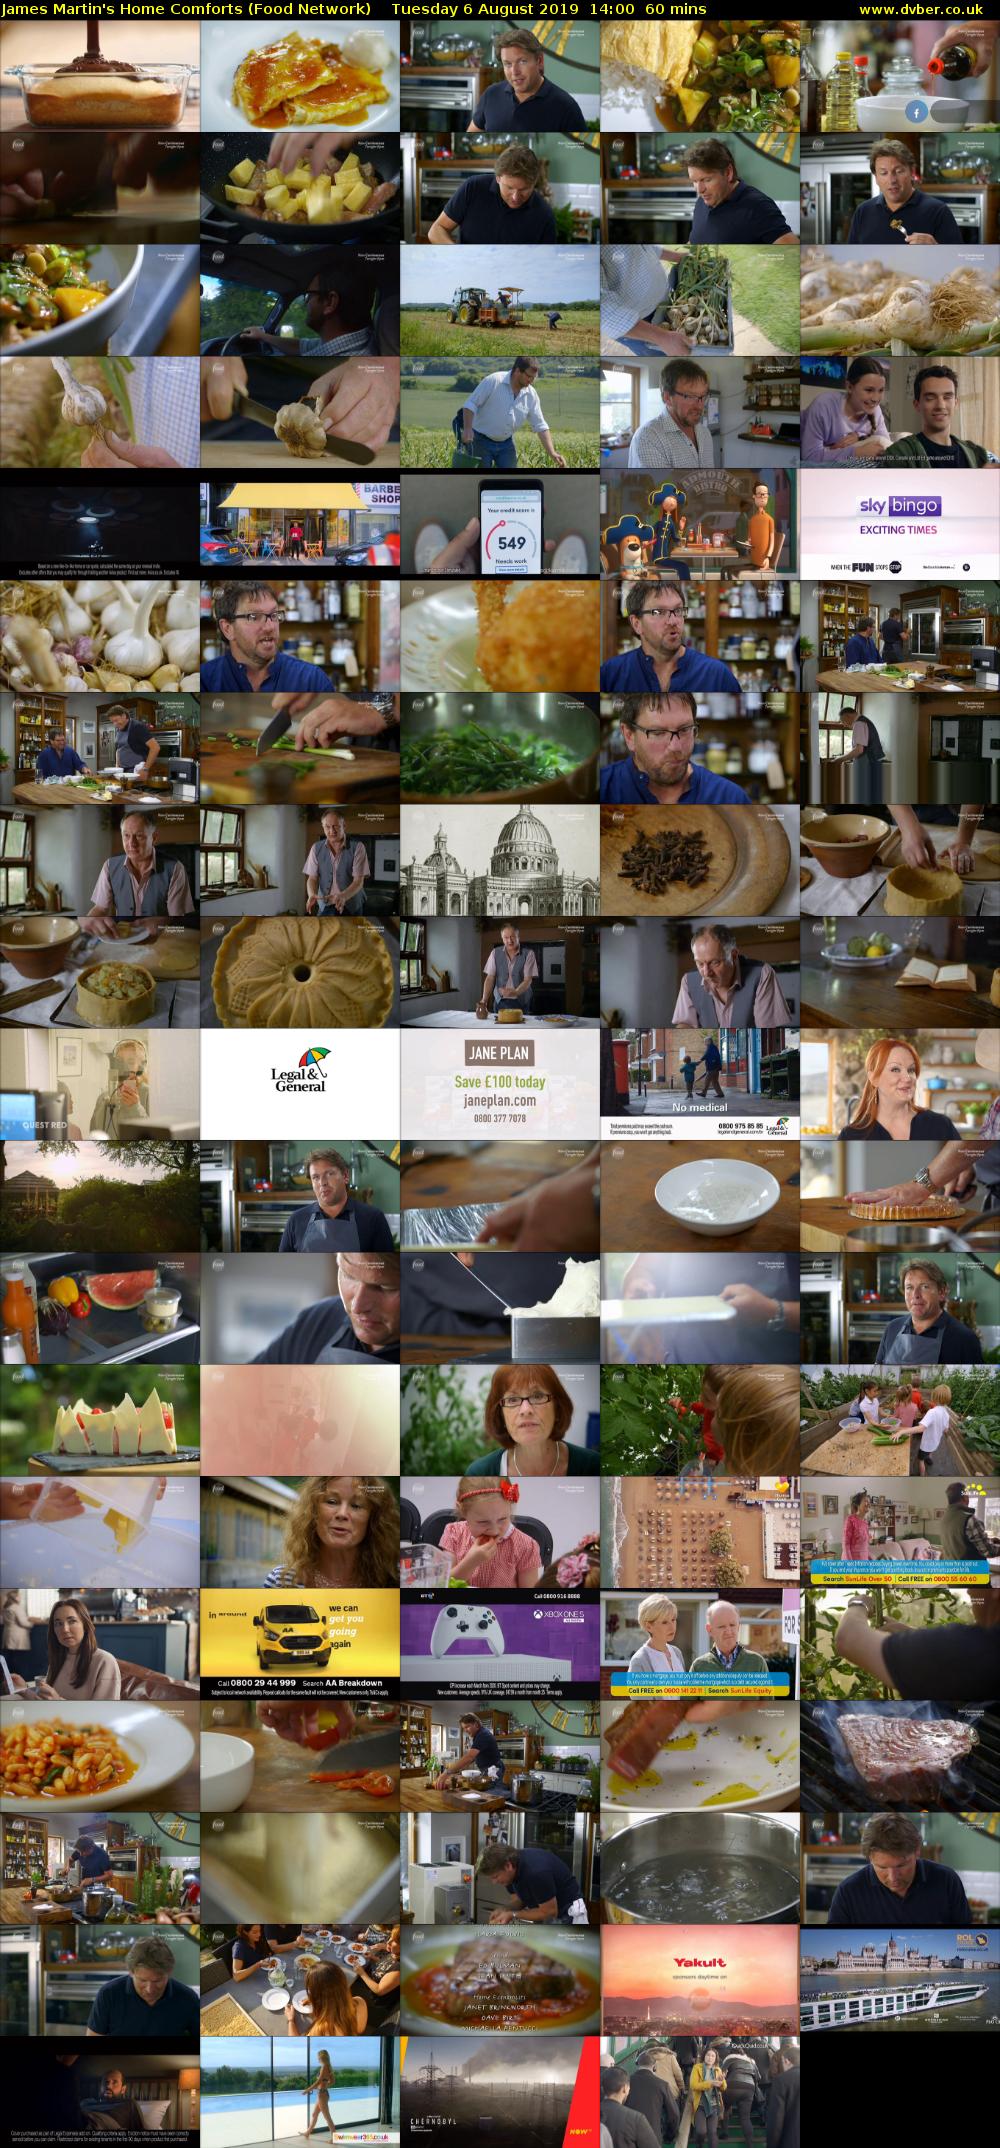 James Martin's Home Comforts (Food Network) Tuesday 6 August 2019 14:00 - 15:00